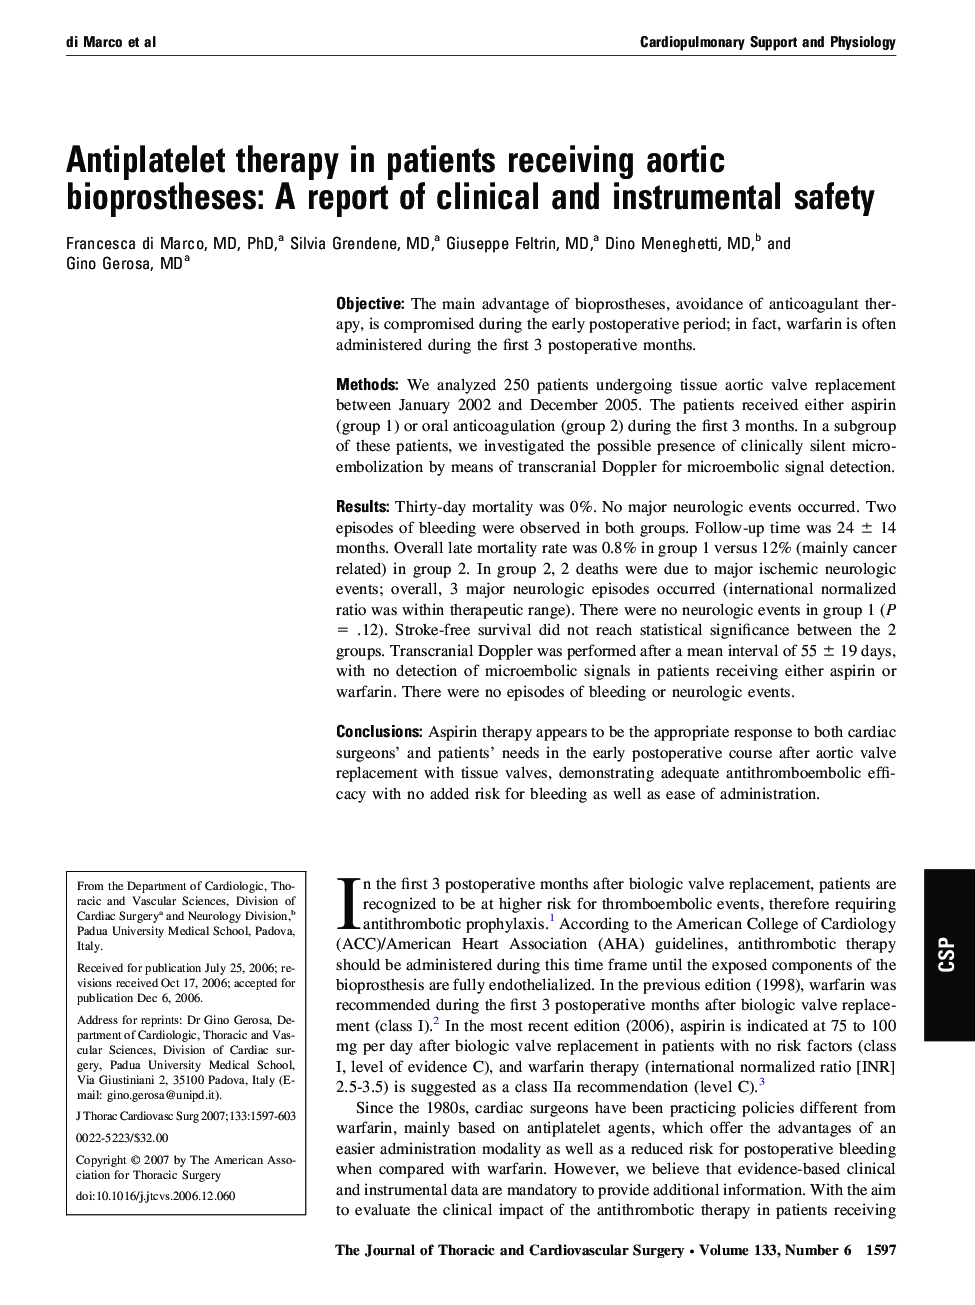 Antiplatelet therapy in patients receiving aortic bioprostheses: A report of clinical and instrumental safety